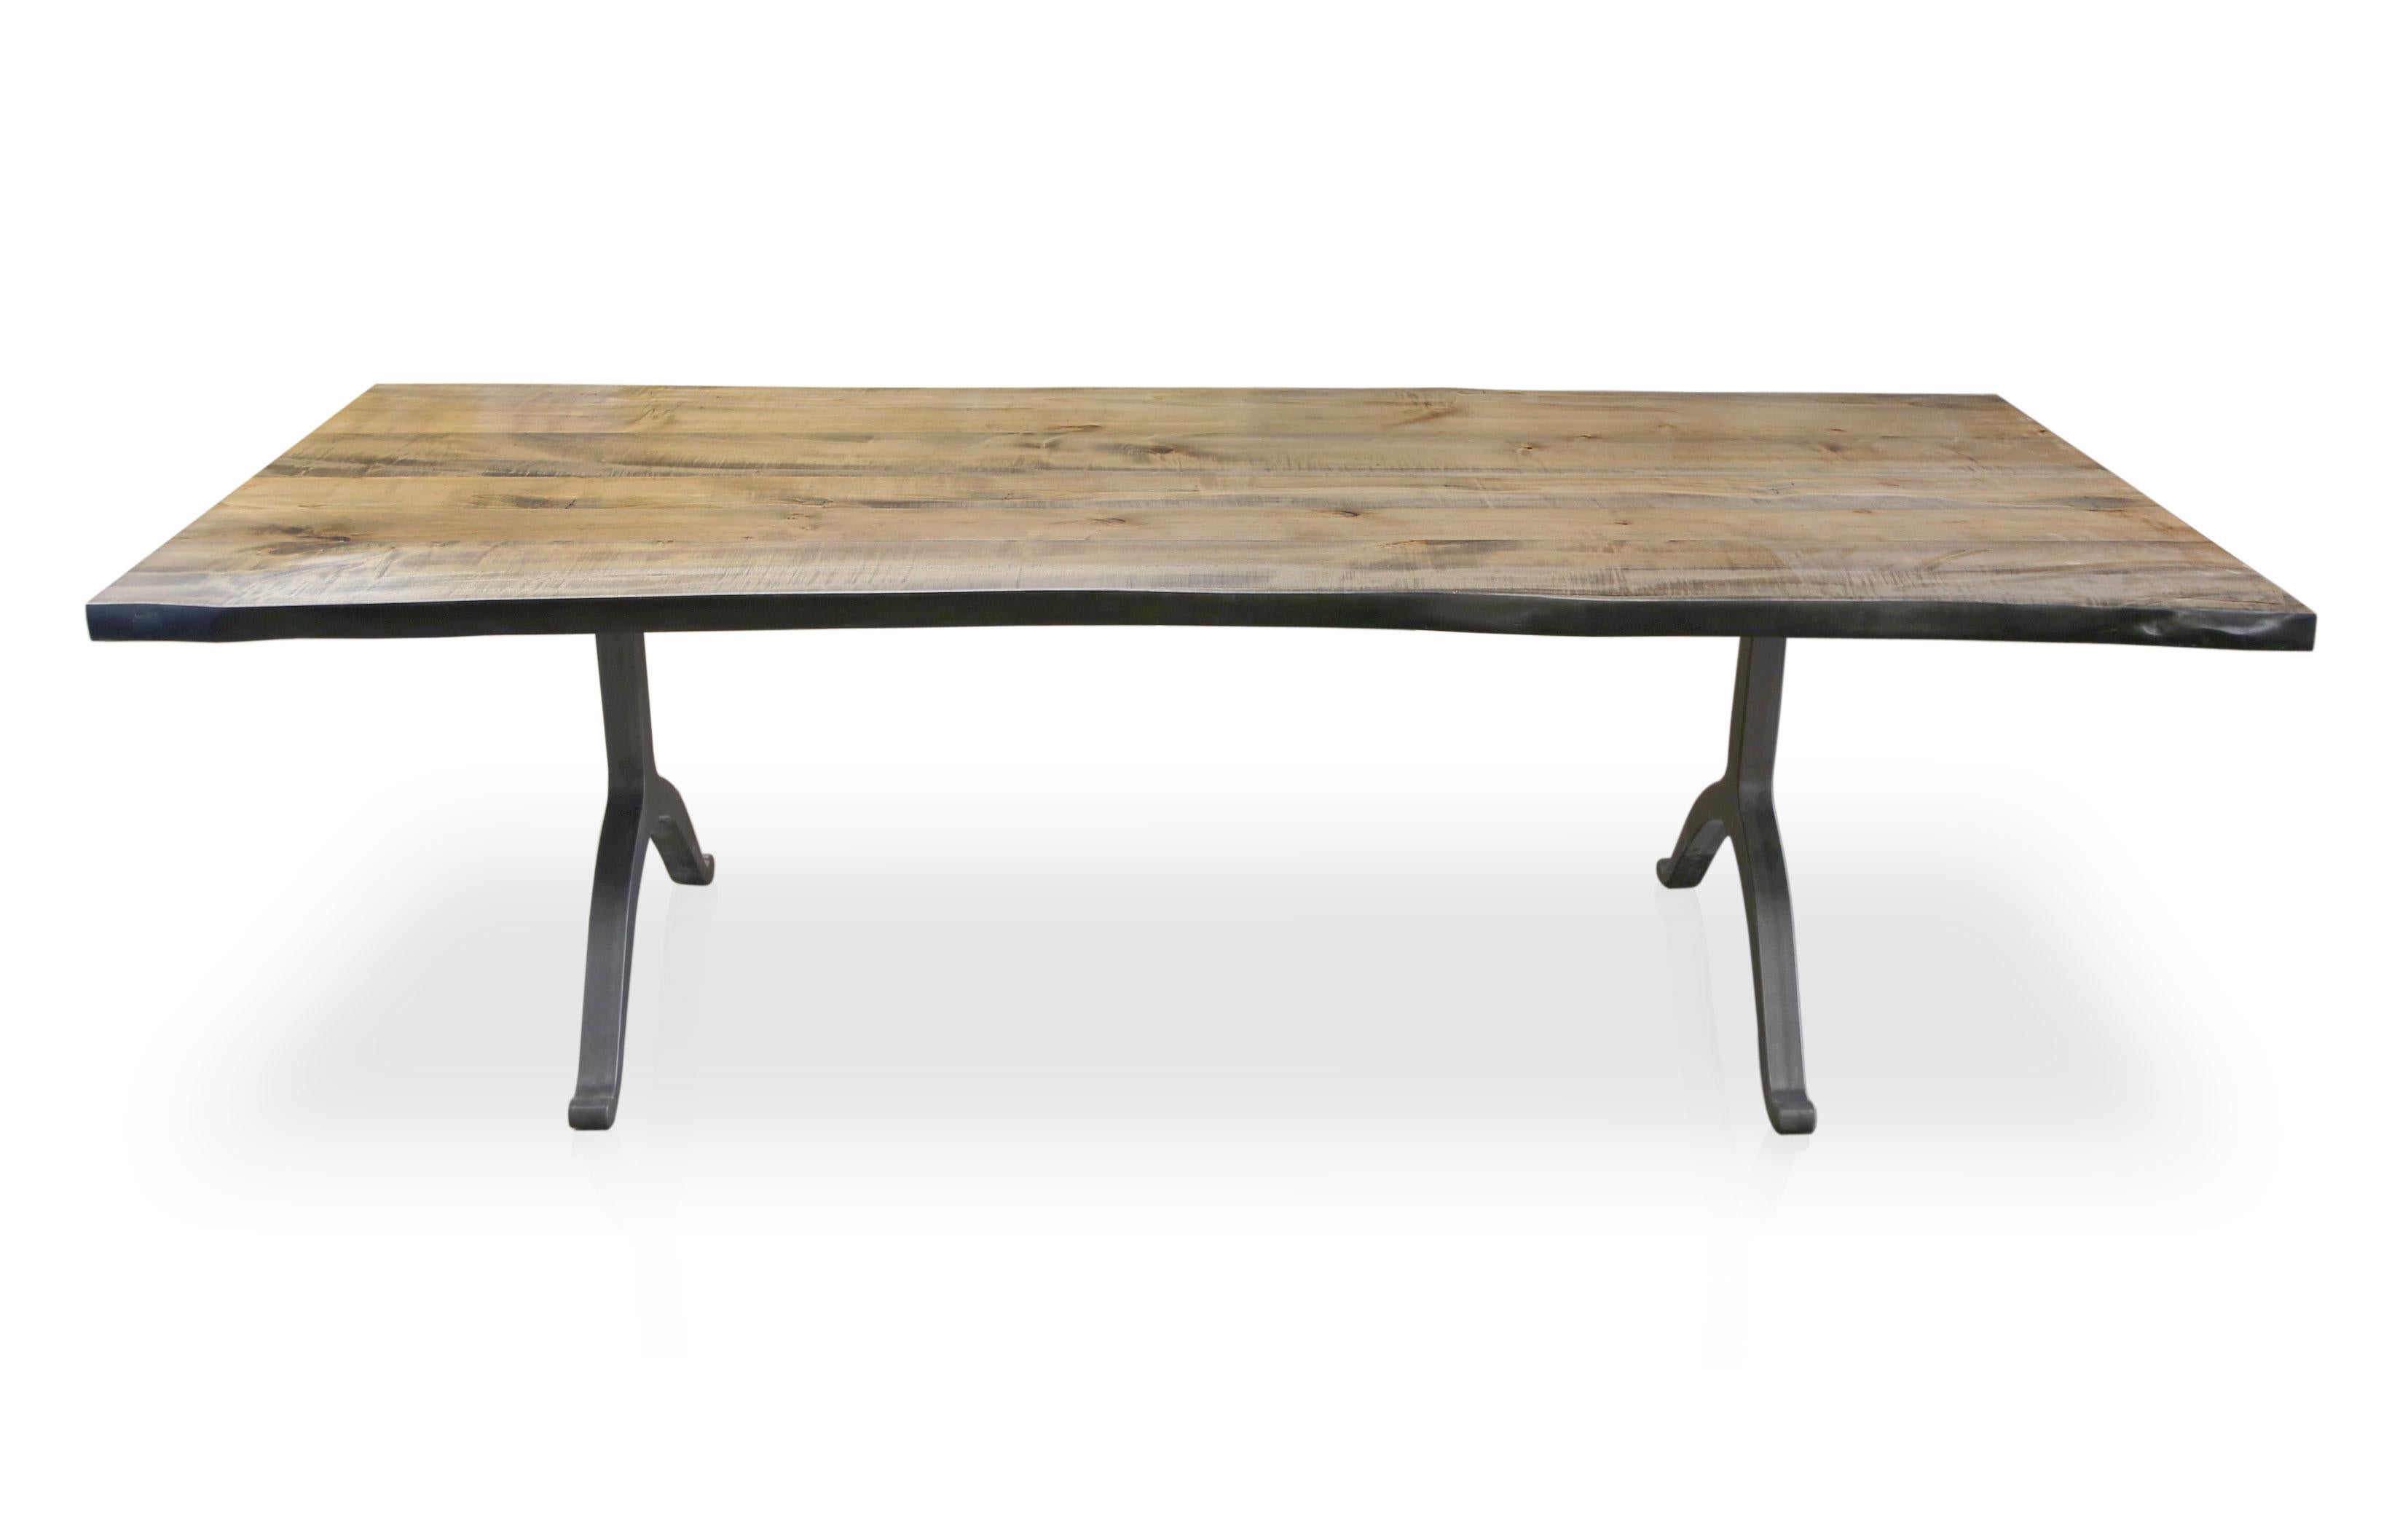 Solid American maple live edge tabletop with a grey driftwood finish, paired with our solid blackened steel wishbone legs. 84 x 36

Our tables let the maple grain speak for itself with a durable clear coat finish over the wood and a grey stain that